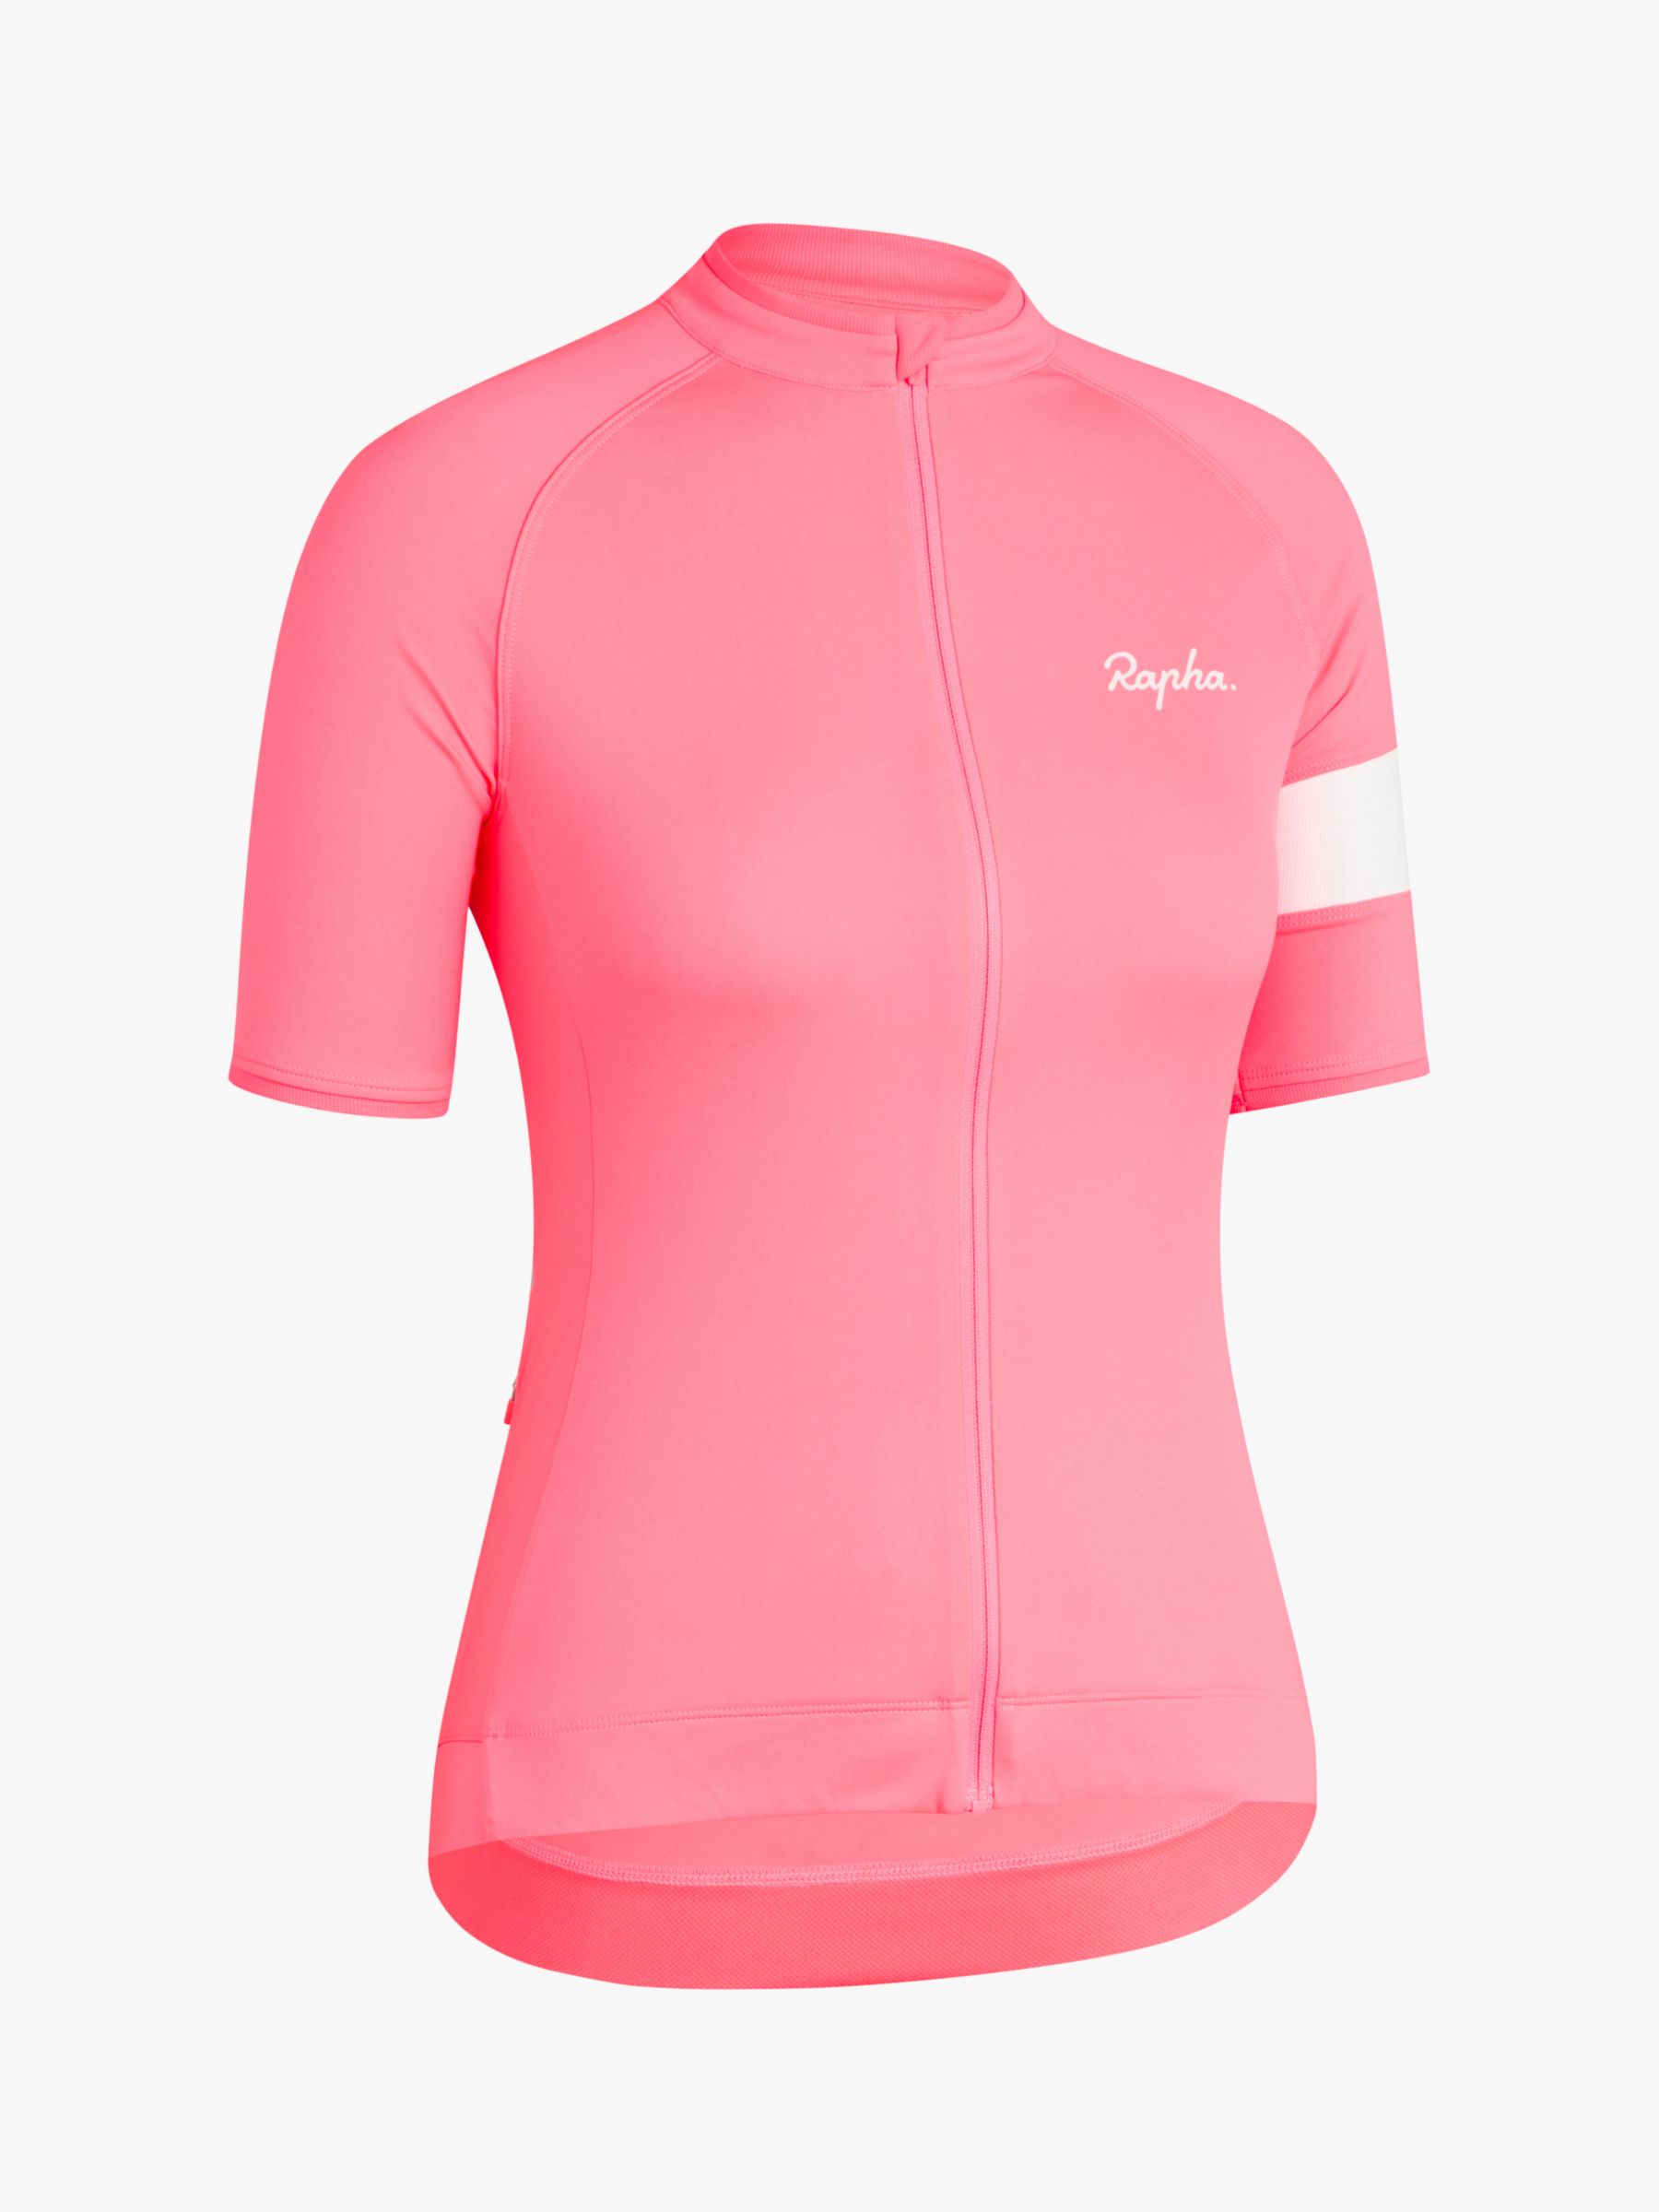 Buy Rapha Core Jersey Short Sleeve Cycling Top Online at johnlewis.com